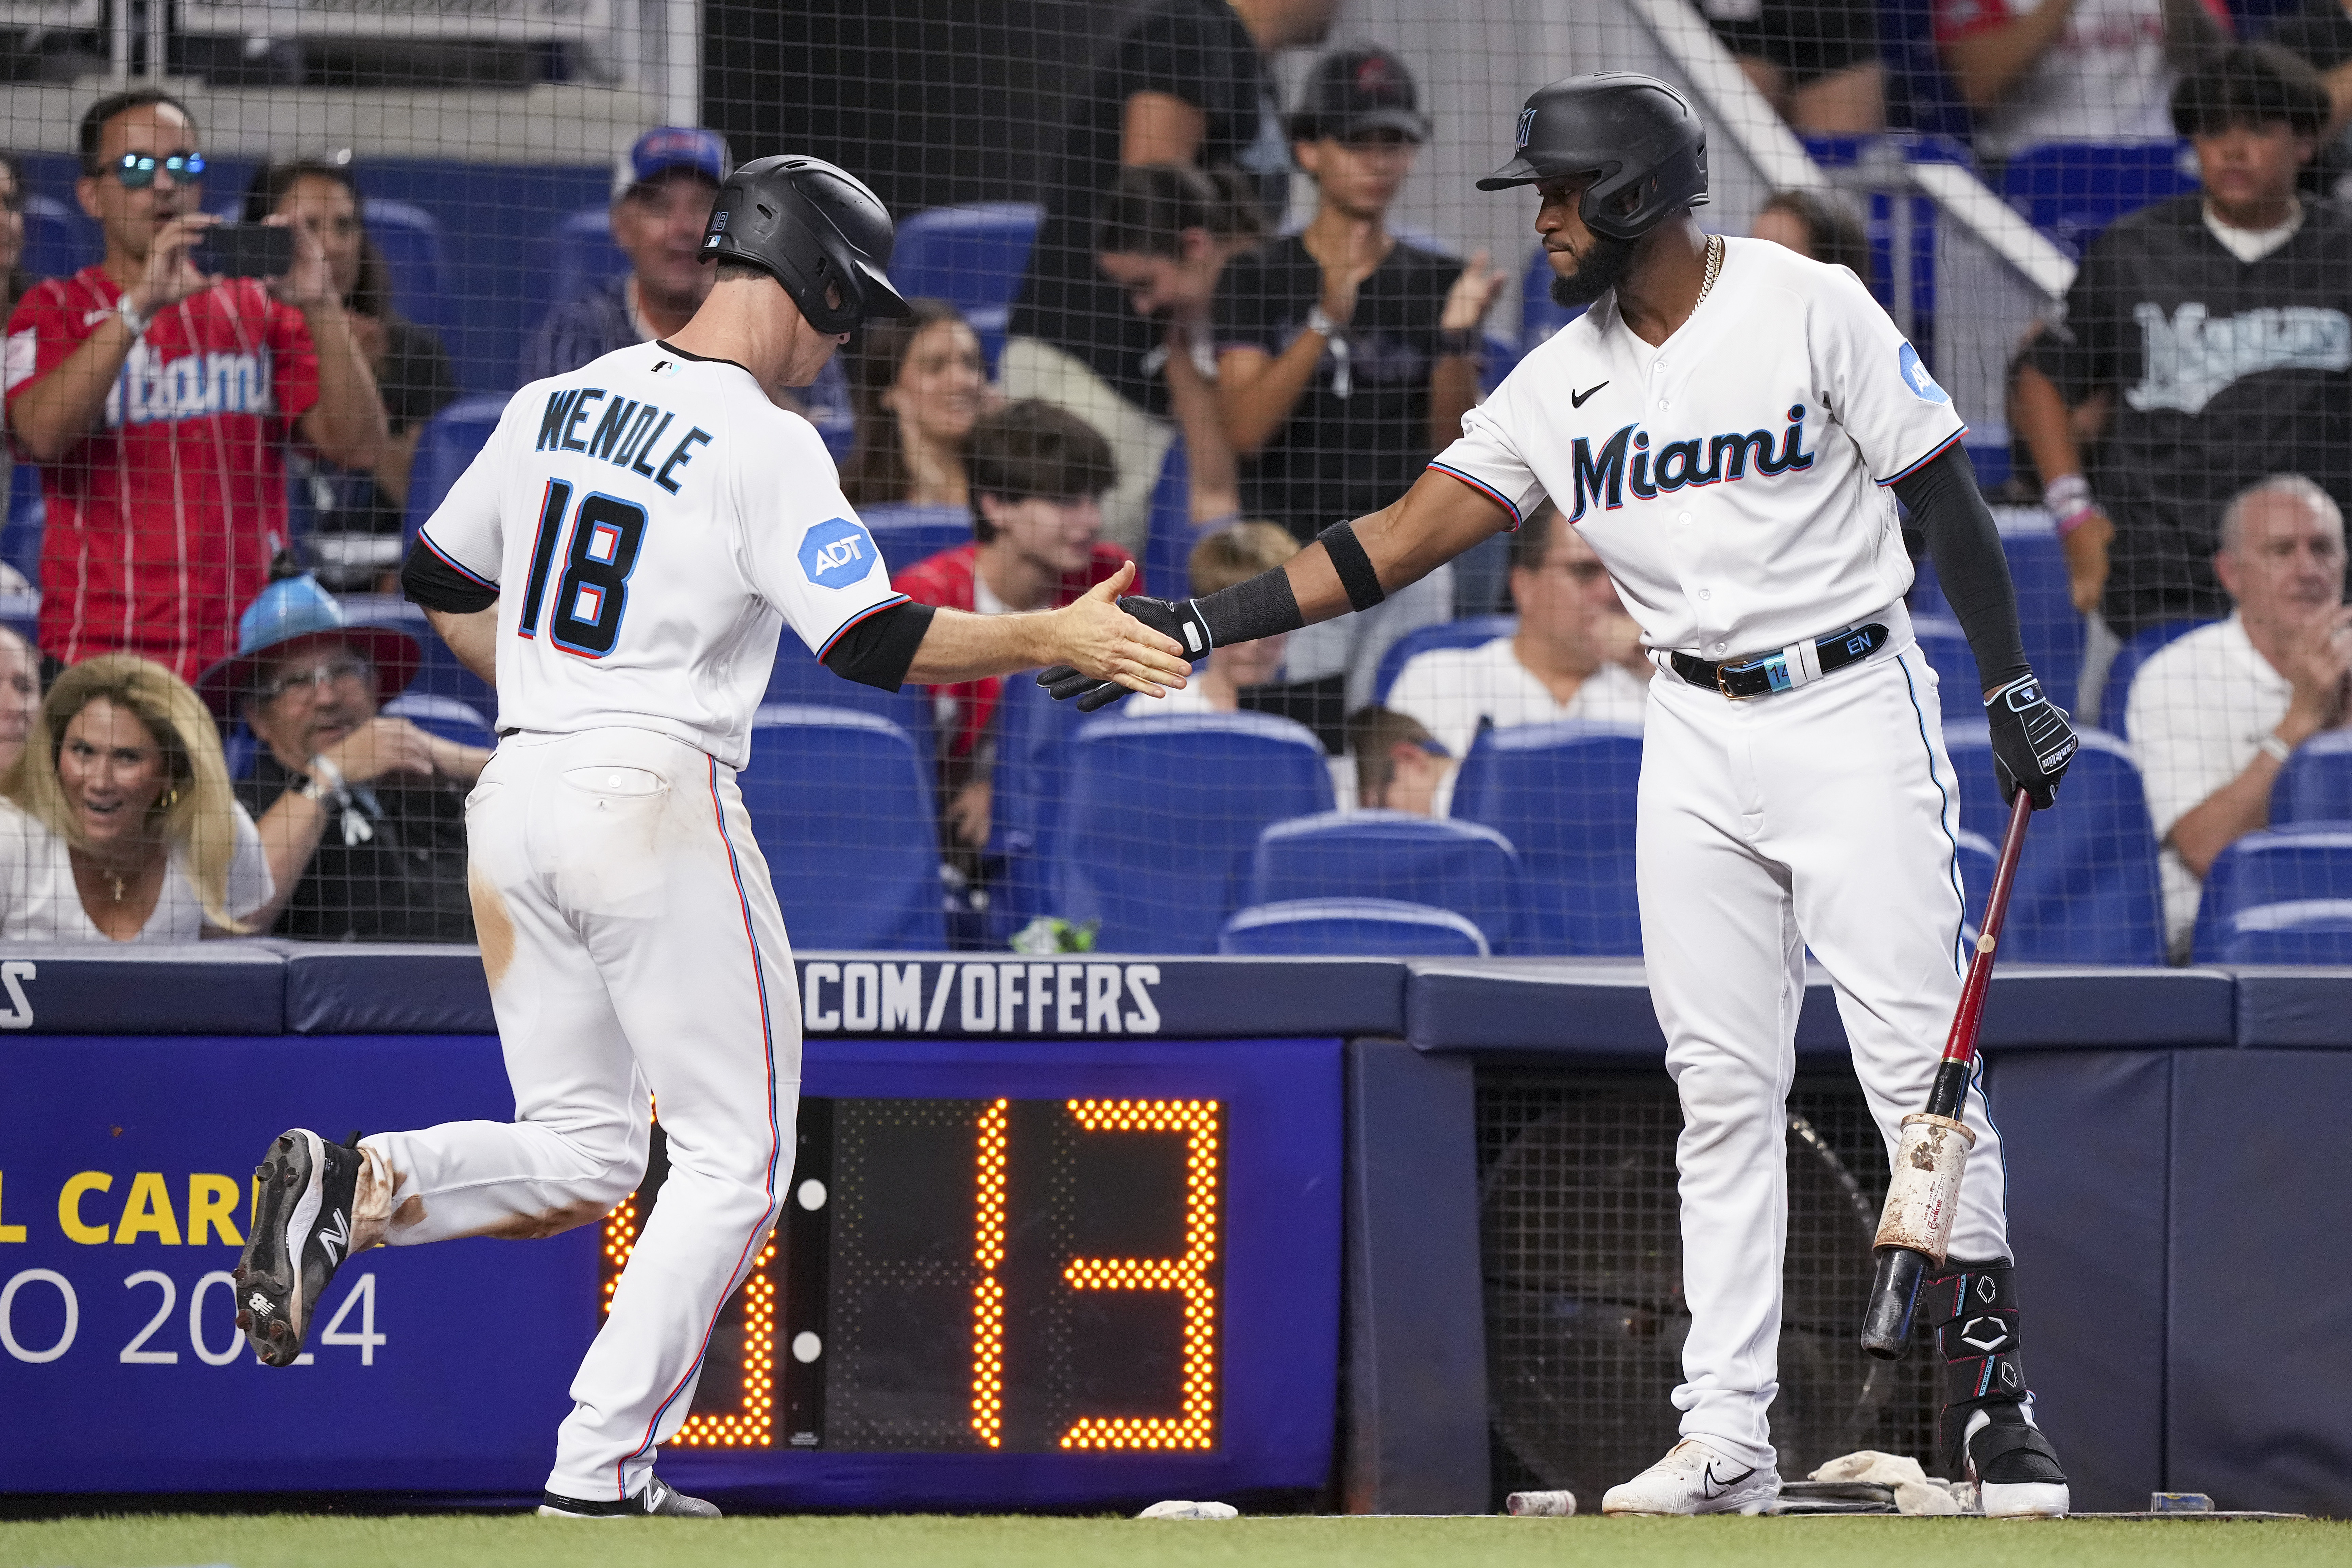 Marlins top Royals, sweep second straight series